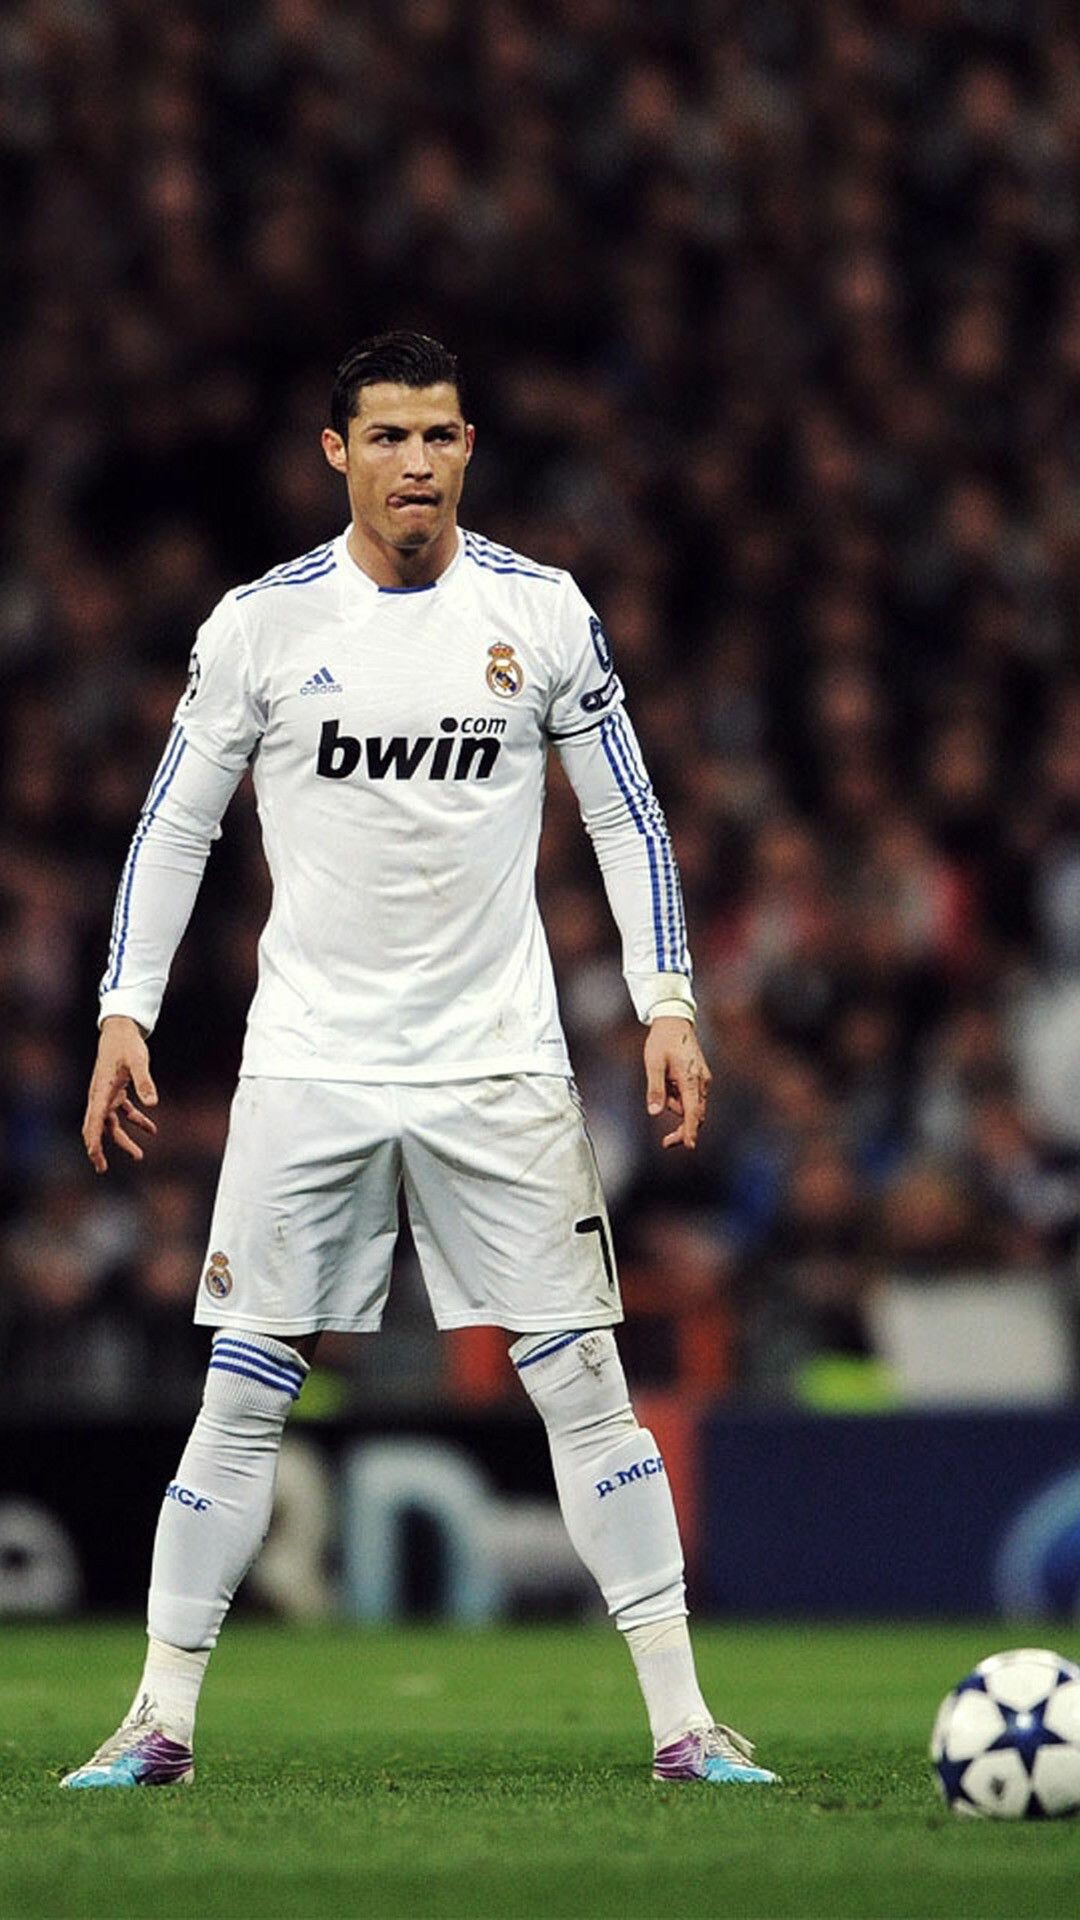 49+ Cristiano Ronaldo Cool Wallpapers: HD, 4K, 5K for PC and Mobile |  Download free images for iPhone, Android